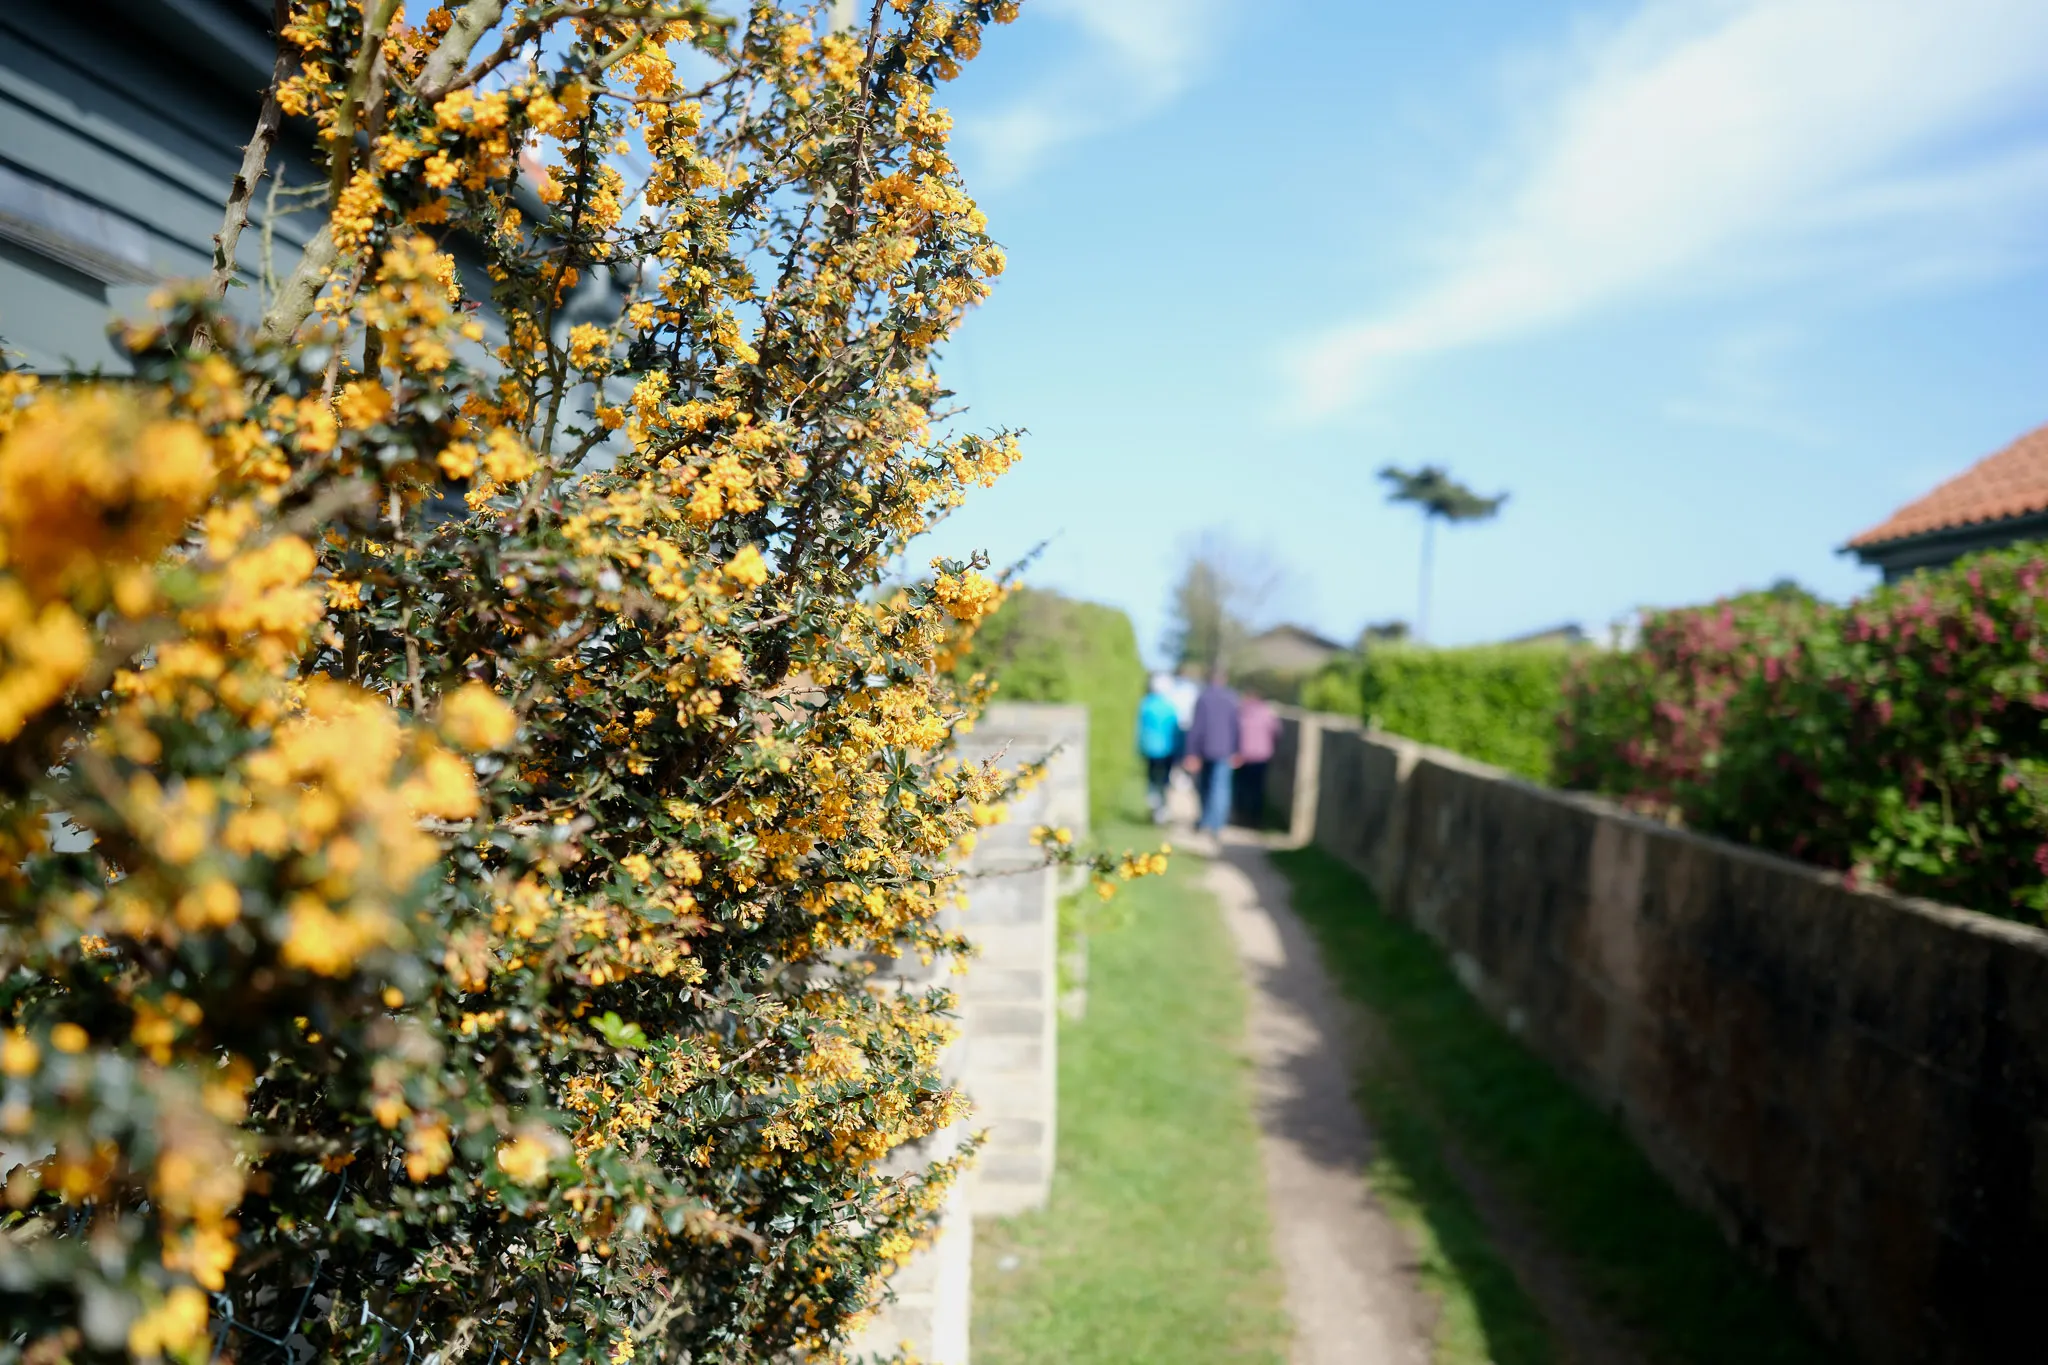 group of people walking down a sidewalk next to walls of beautiful flowers and lush greenery.